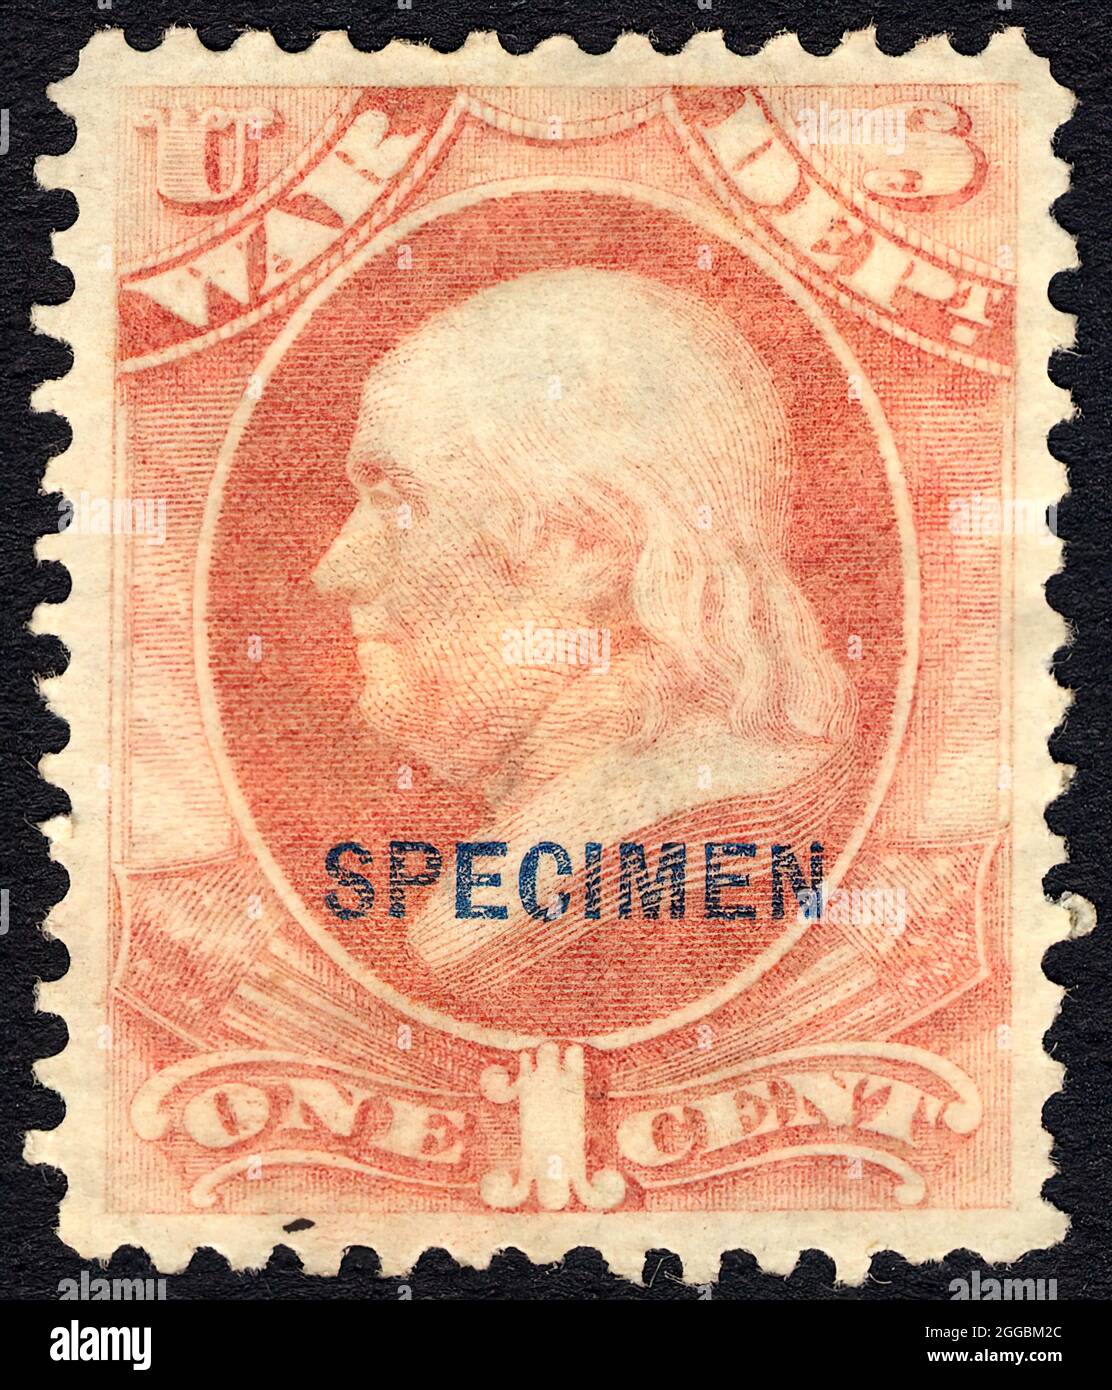 1c Franklin War Department special printing single, 1875. In 1875, Post Office Department officials decided to exhibit samples of all previously issued stamps at the Centennial Exposition in Philadelphia the following year. Since this required a special printing, the department ordered extra copies for sale to stamp collectors. Stock Photo